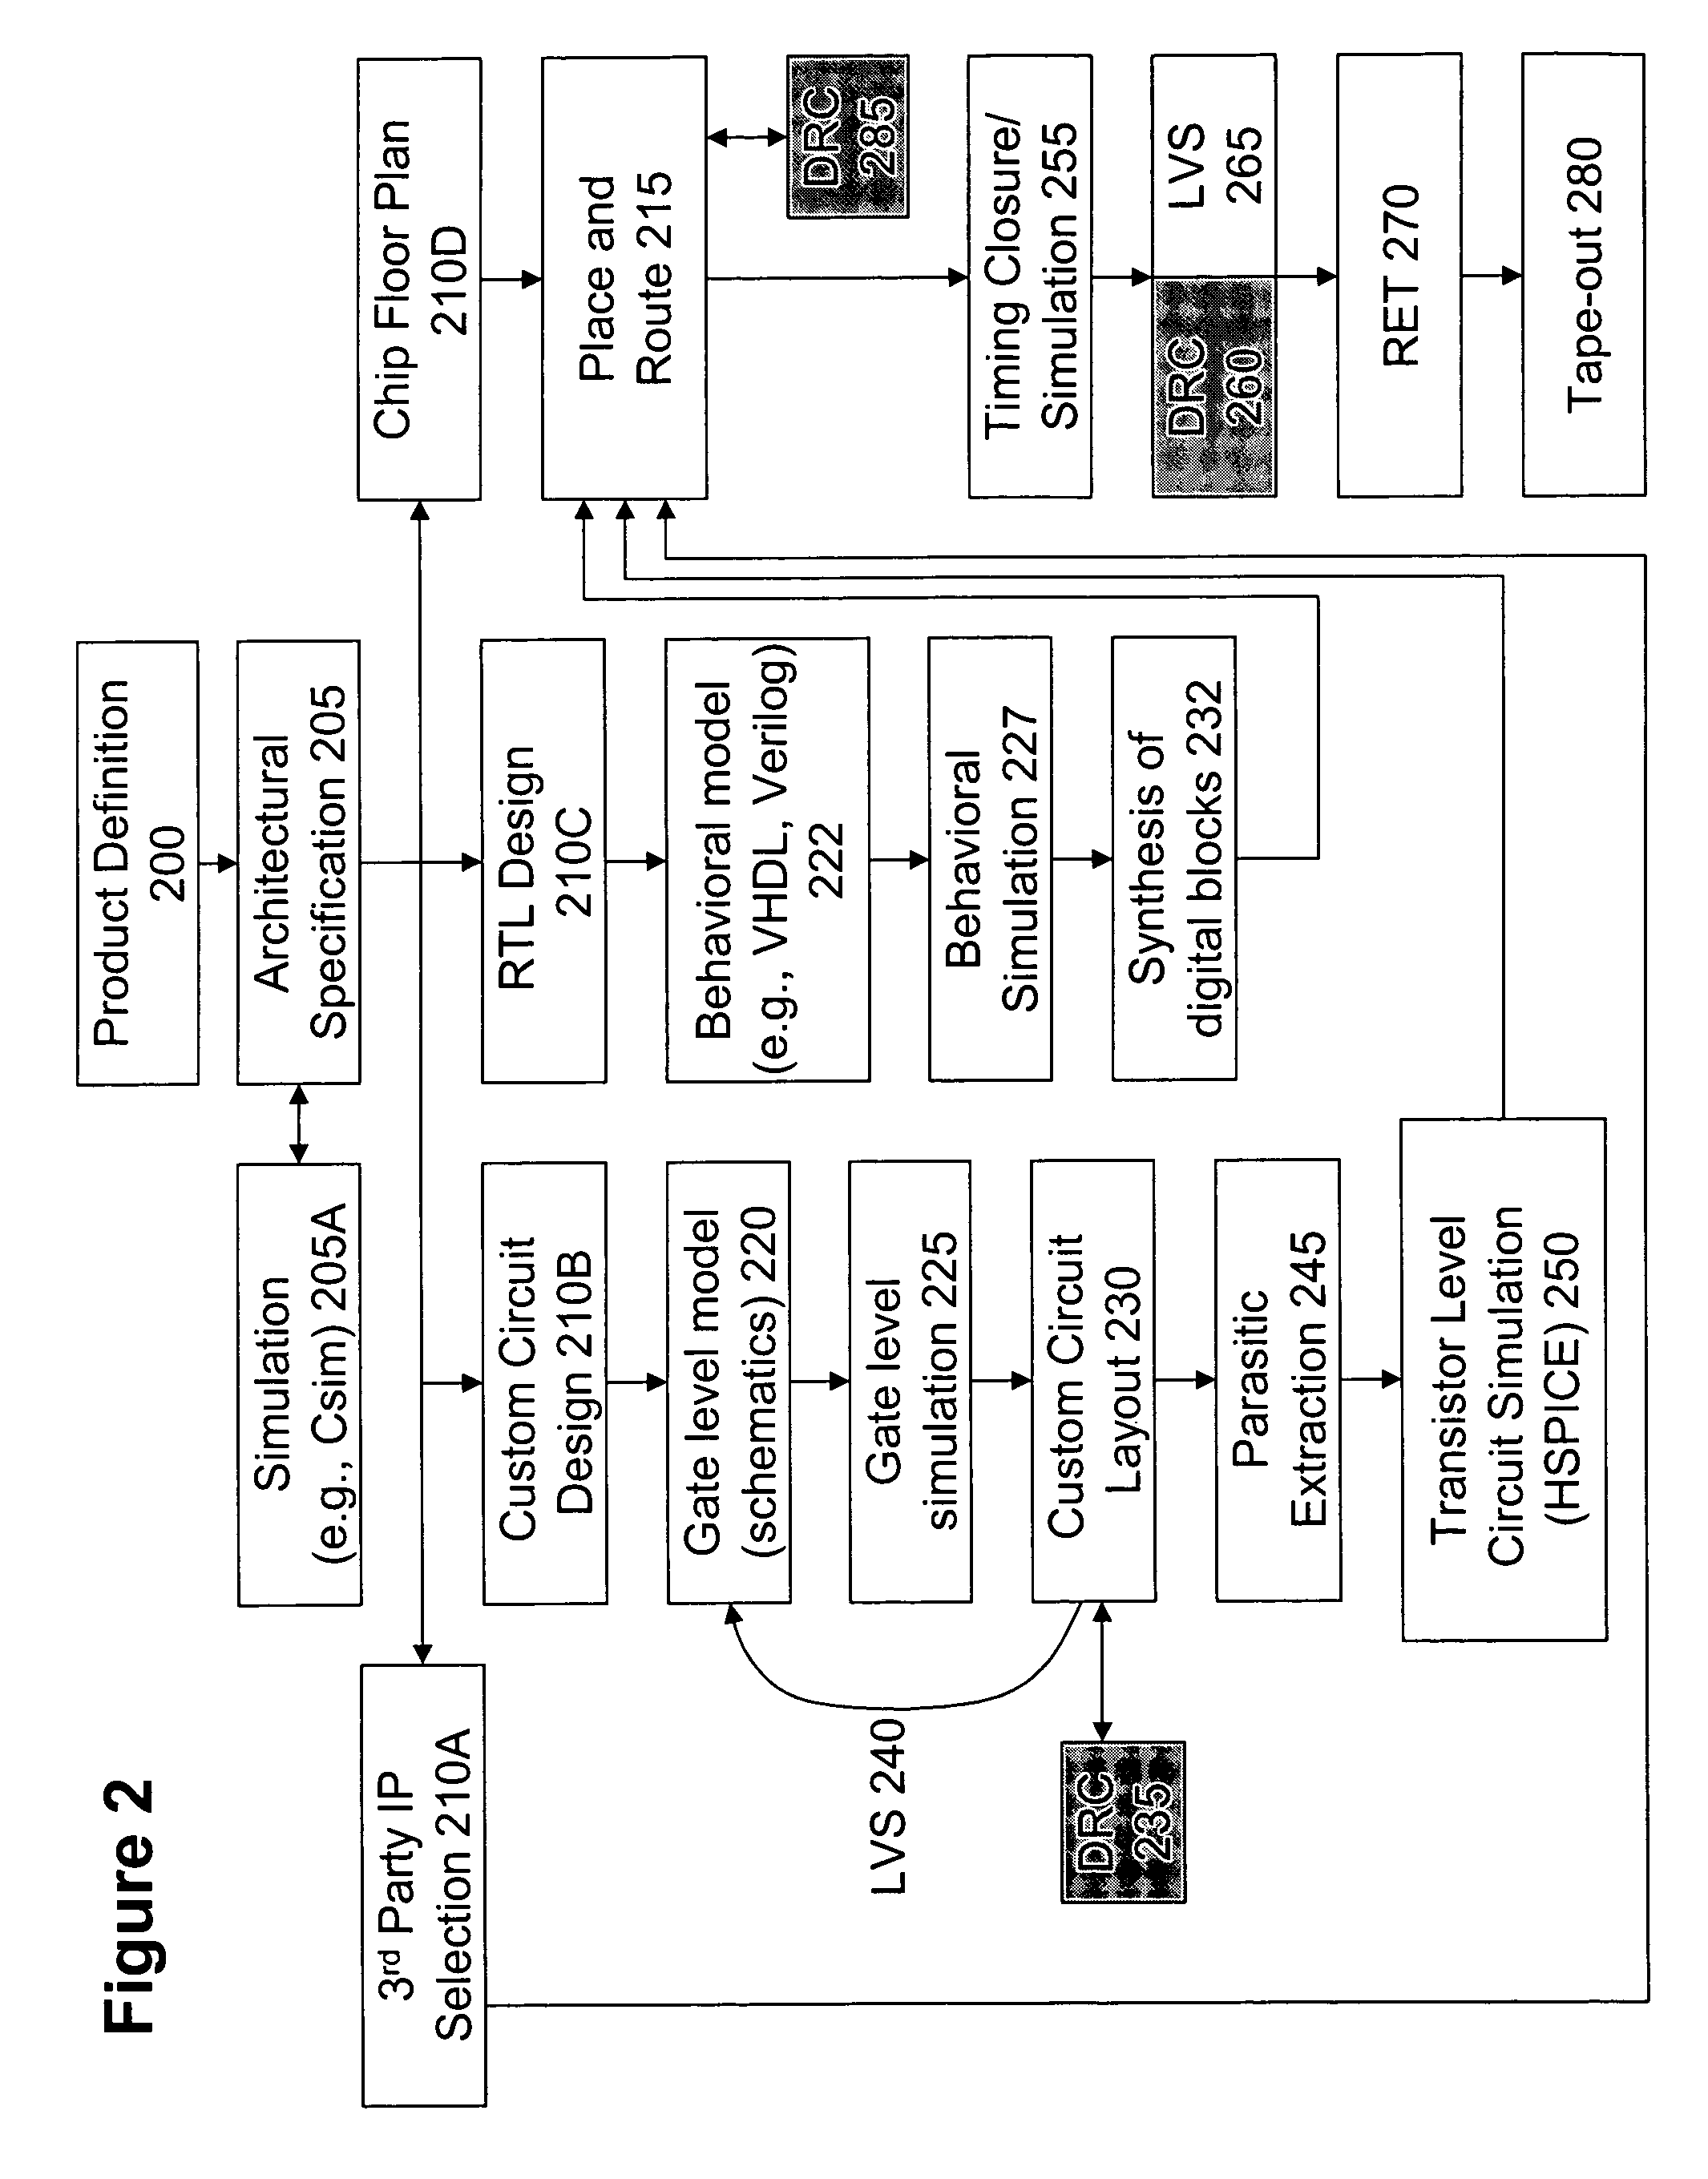 System and method for implementing image-based design rules